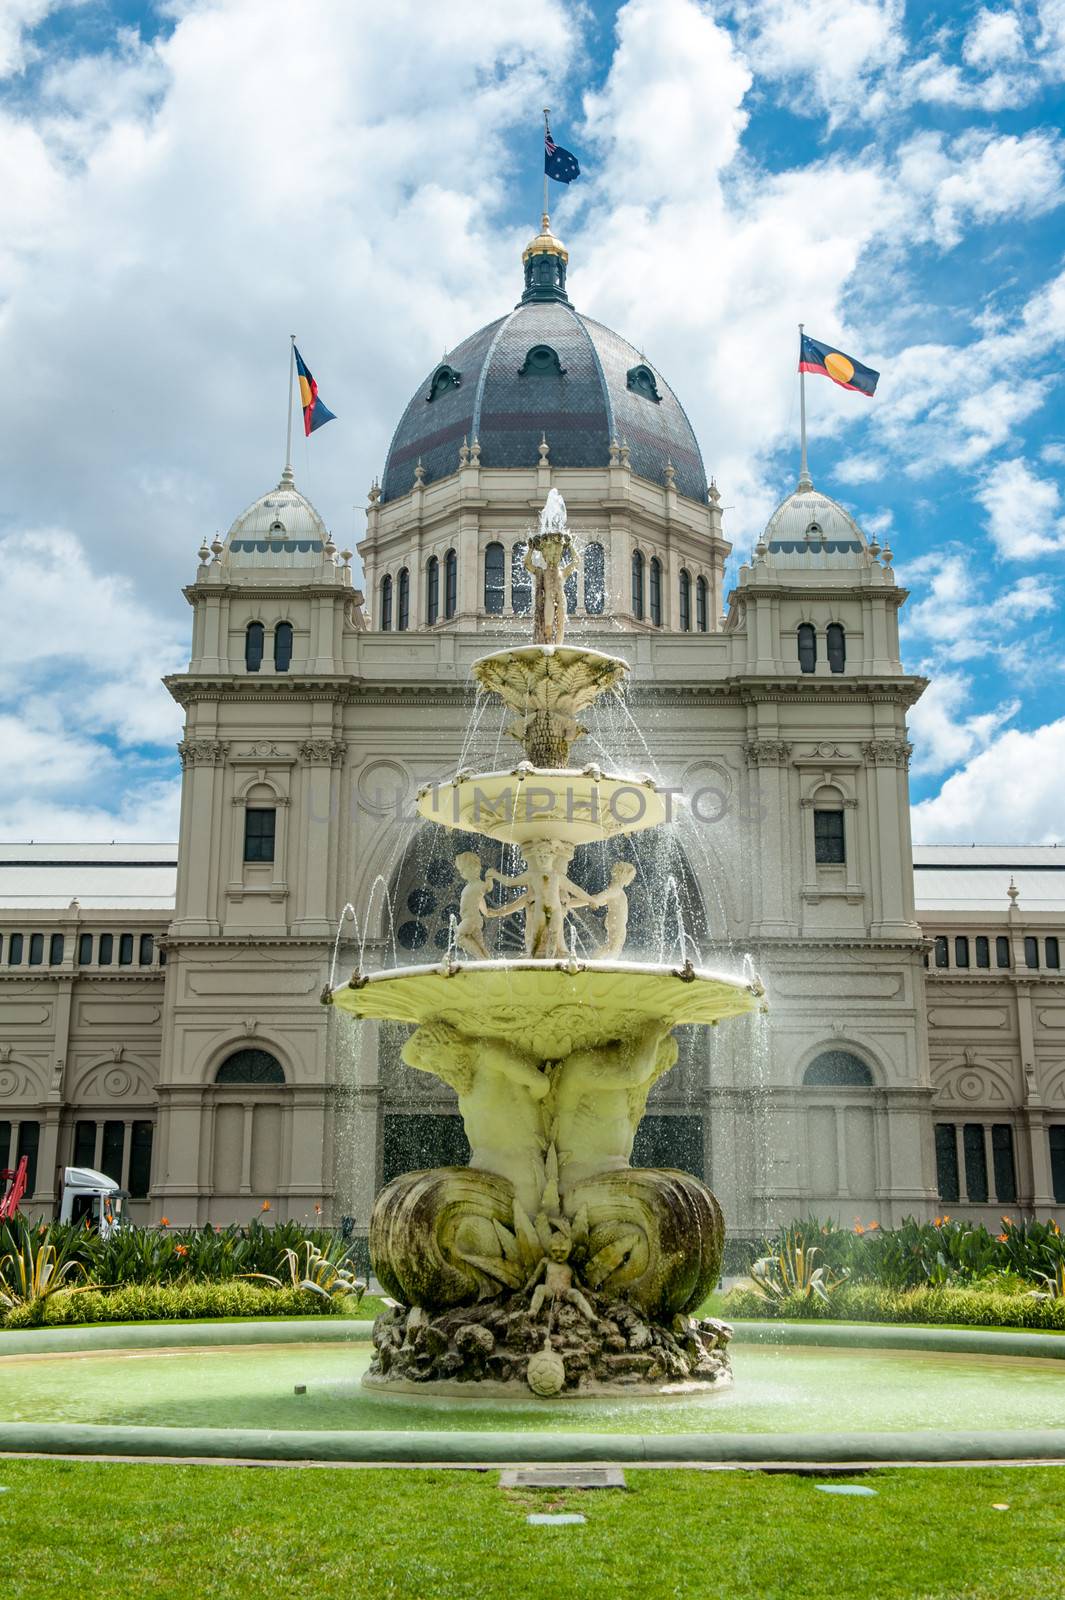 Royal Exhibition Building by fyletto